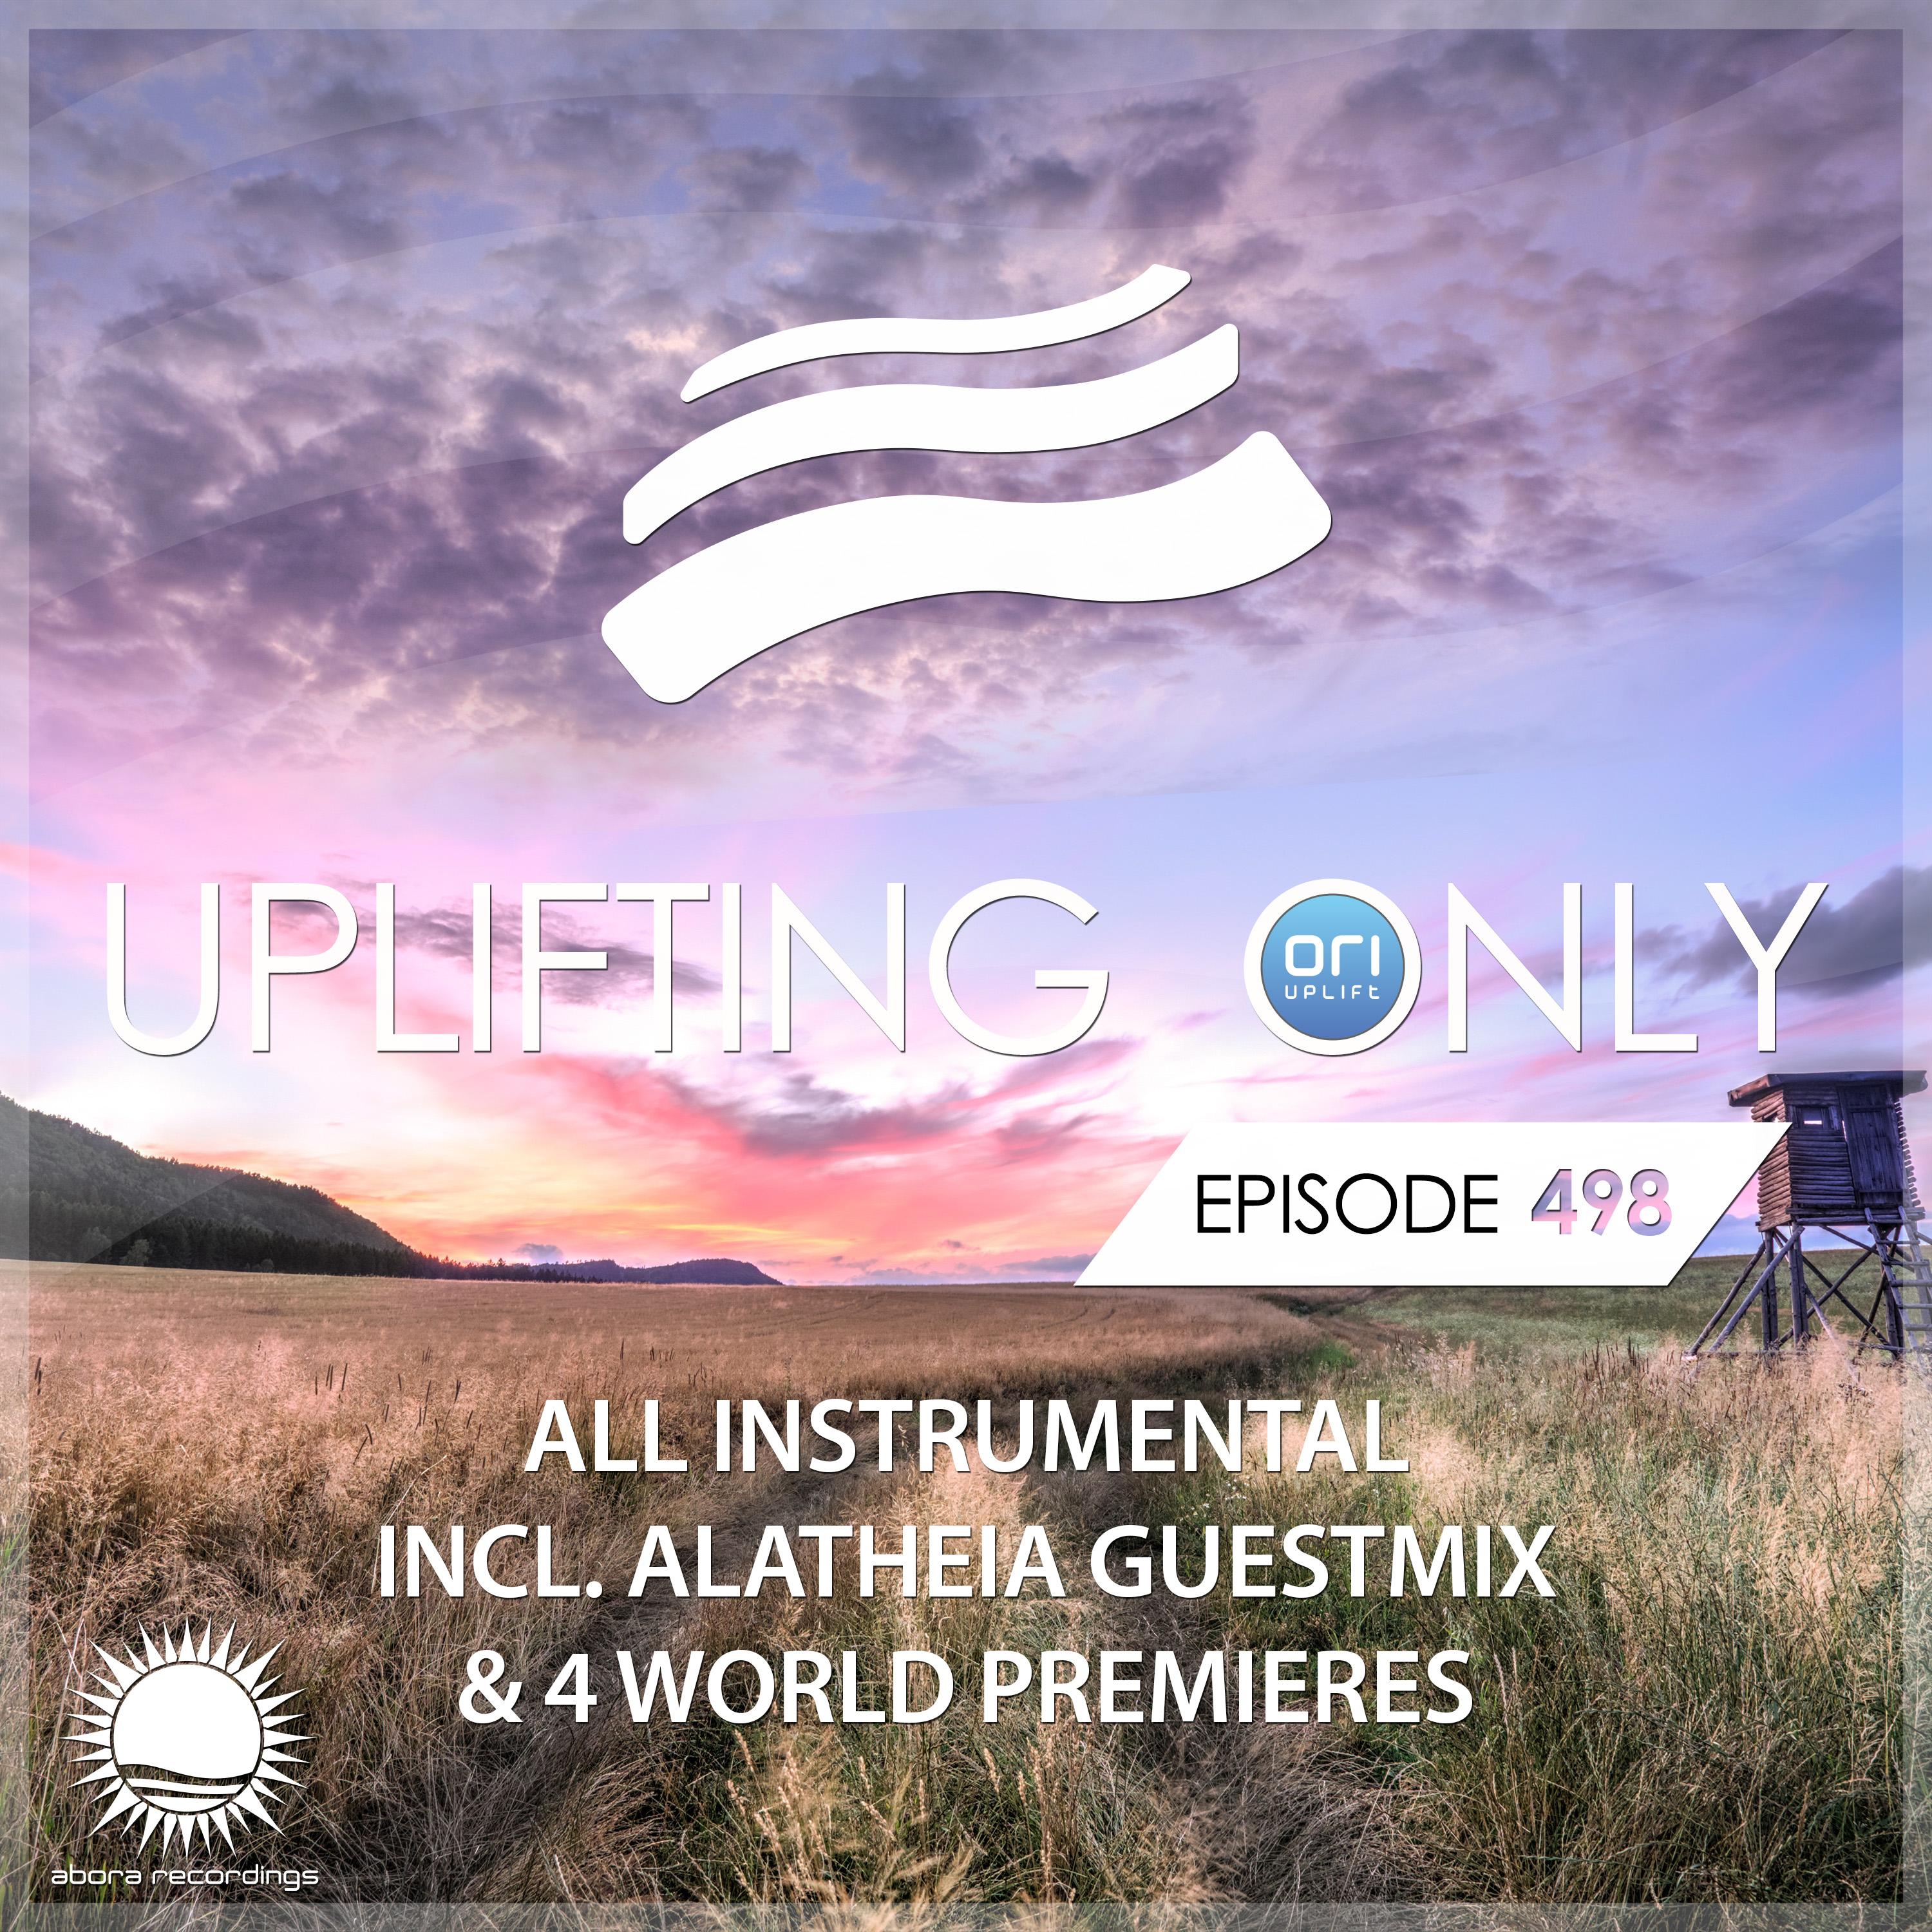 Uplifting Only 498 [No Talking] (incl. Alatheia Guestmix) [All Instrumental] (Aug 25, 2022)